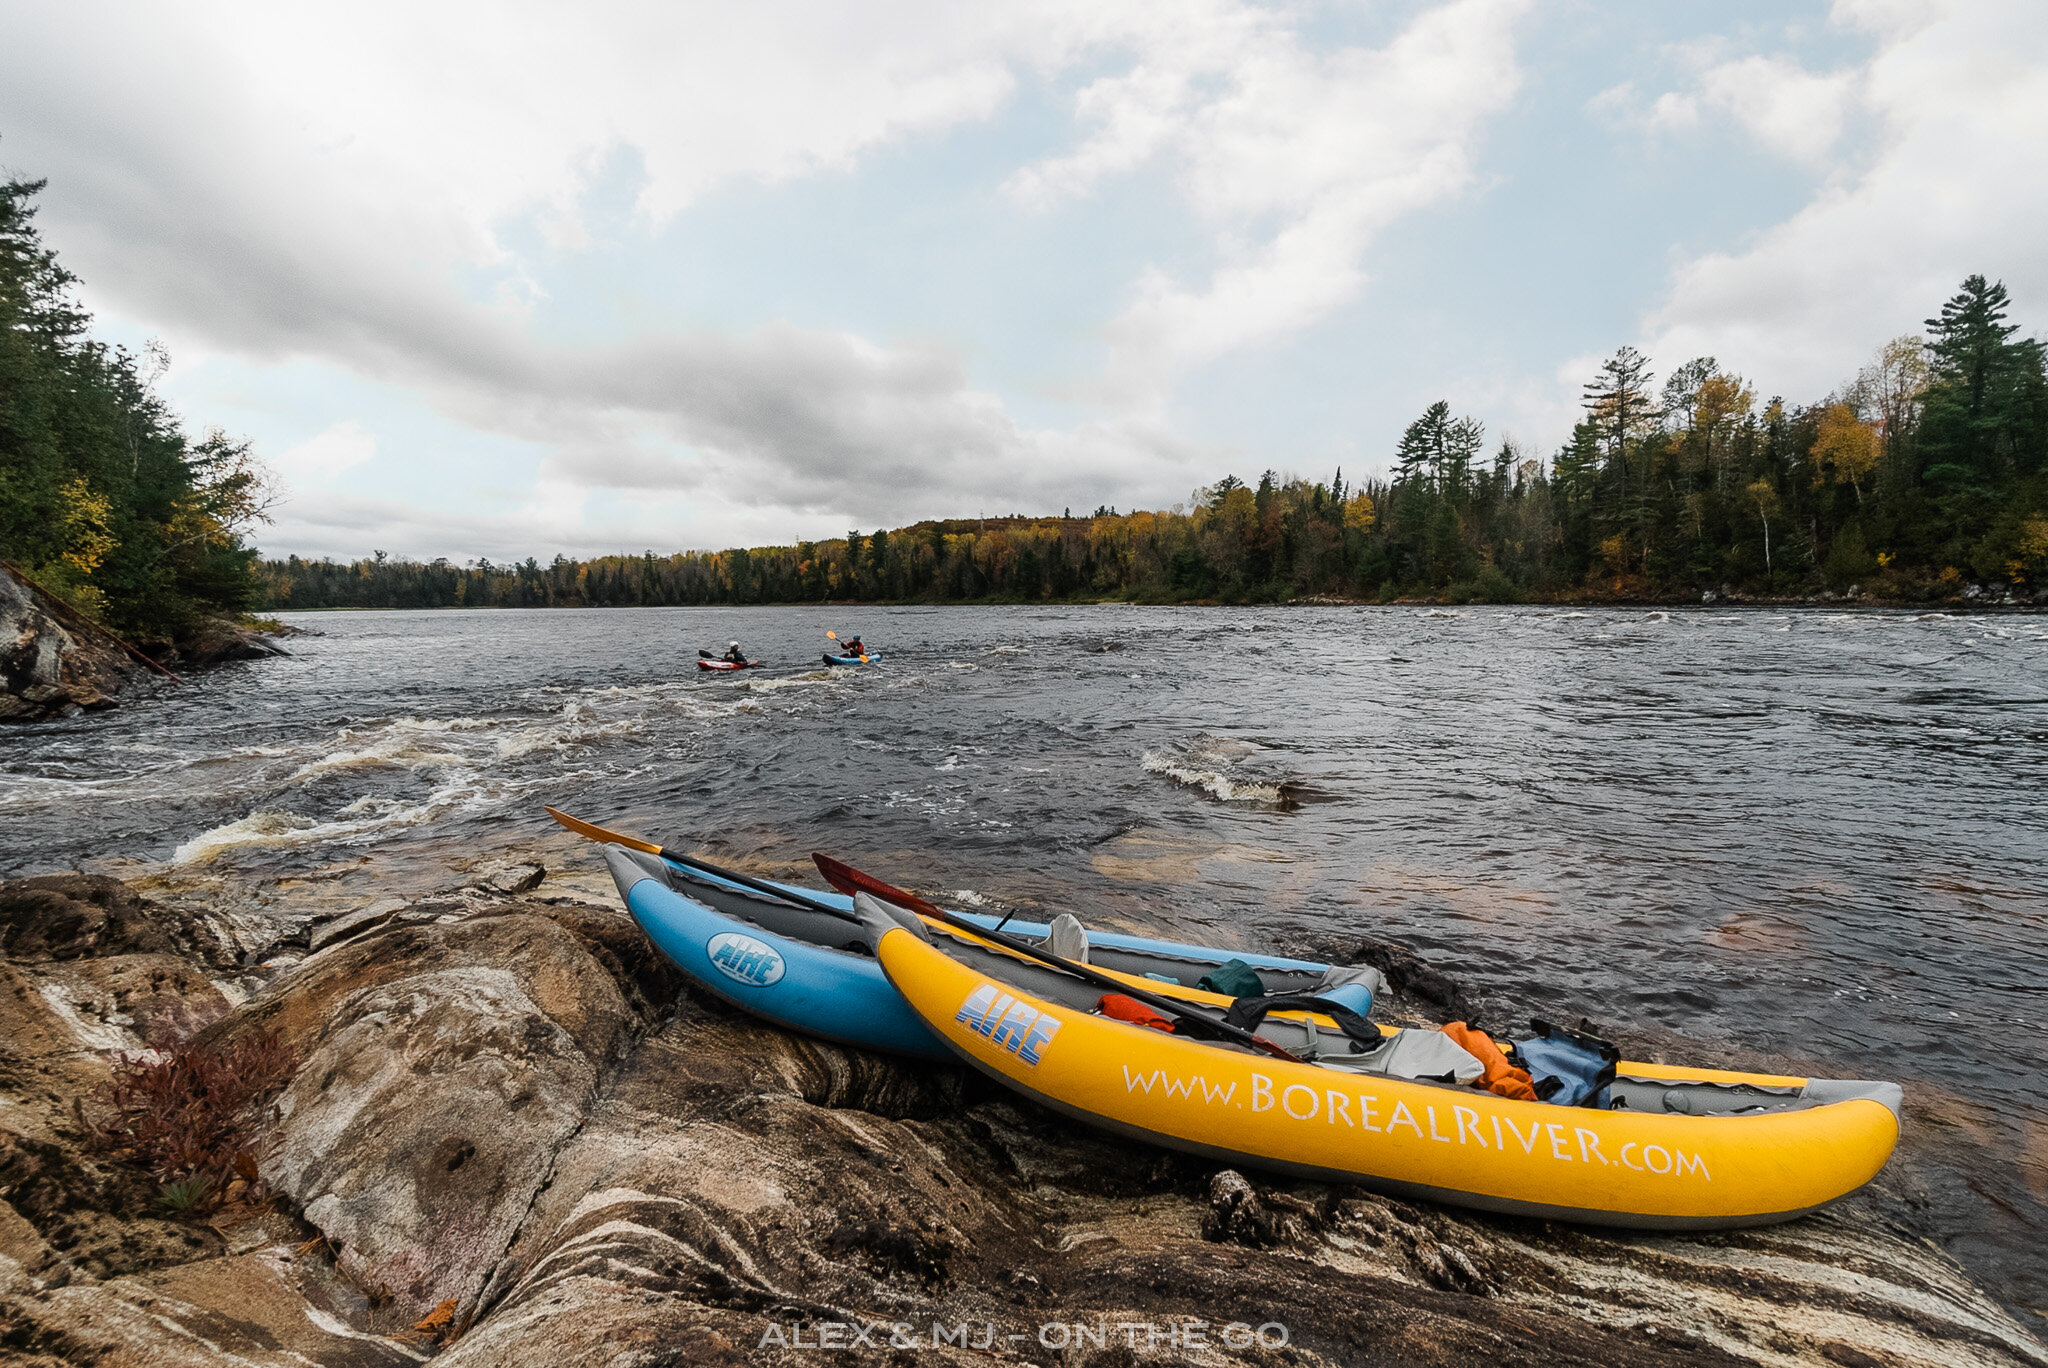 Alex-MJ-On-the-GO-Outaouais-3-activites-couleurs_kayarafting_riviere_kayak.jpg